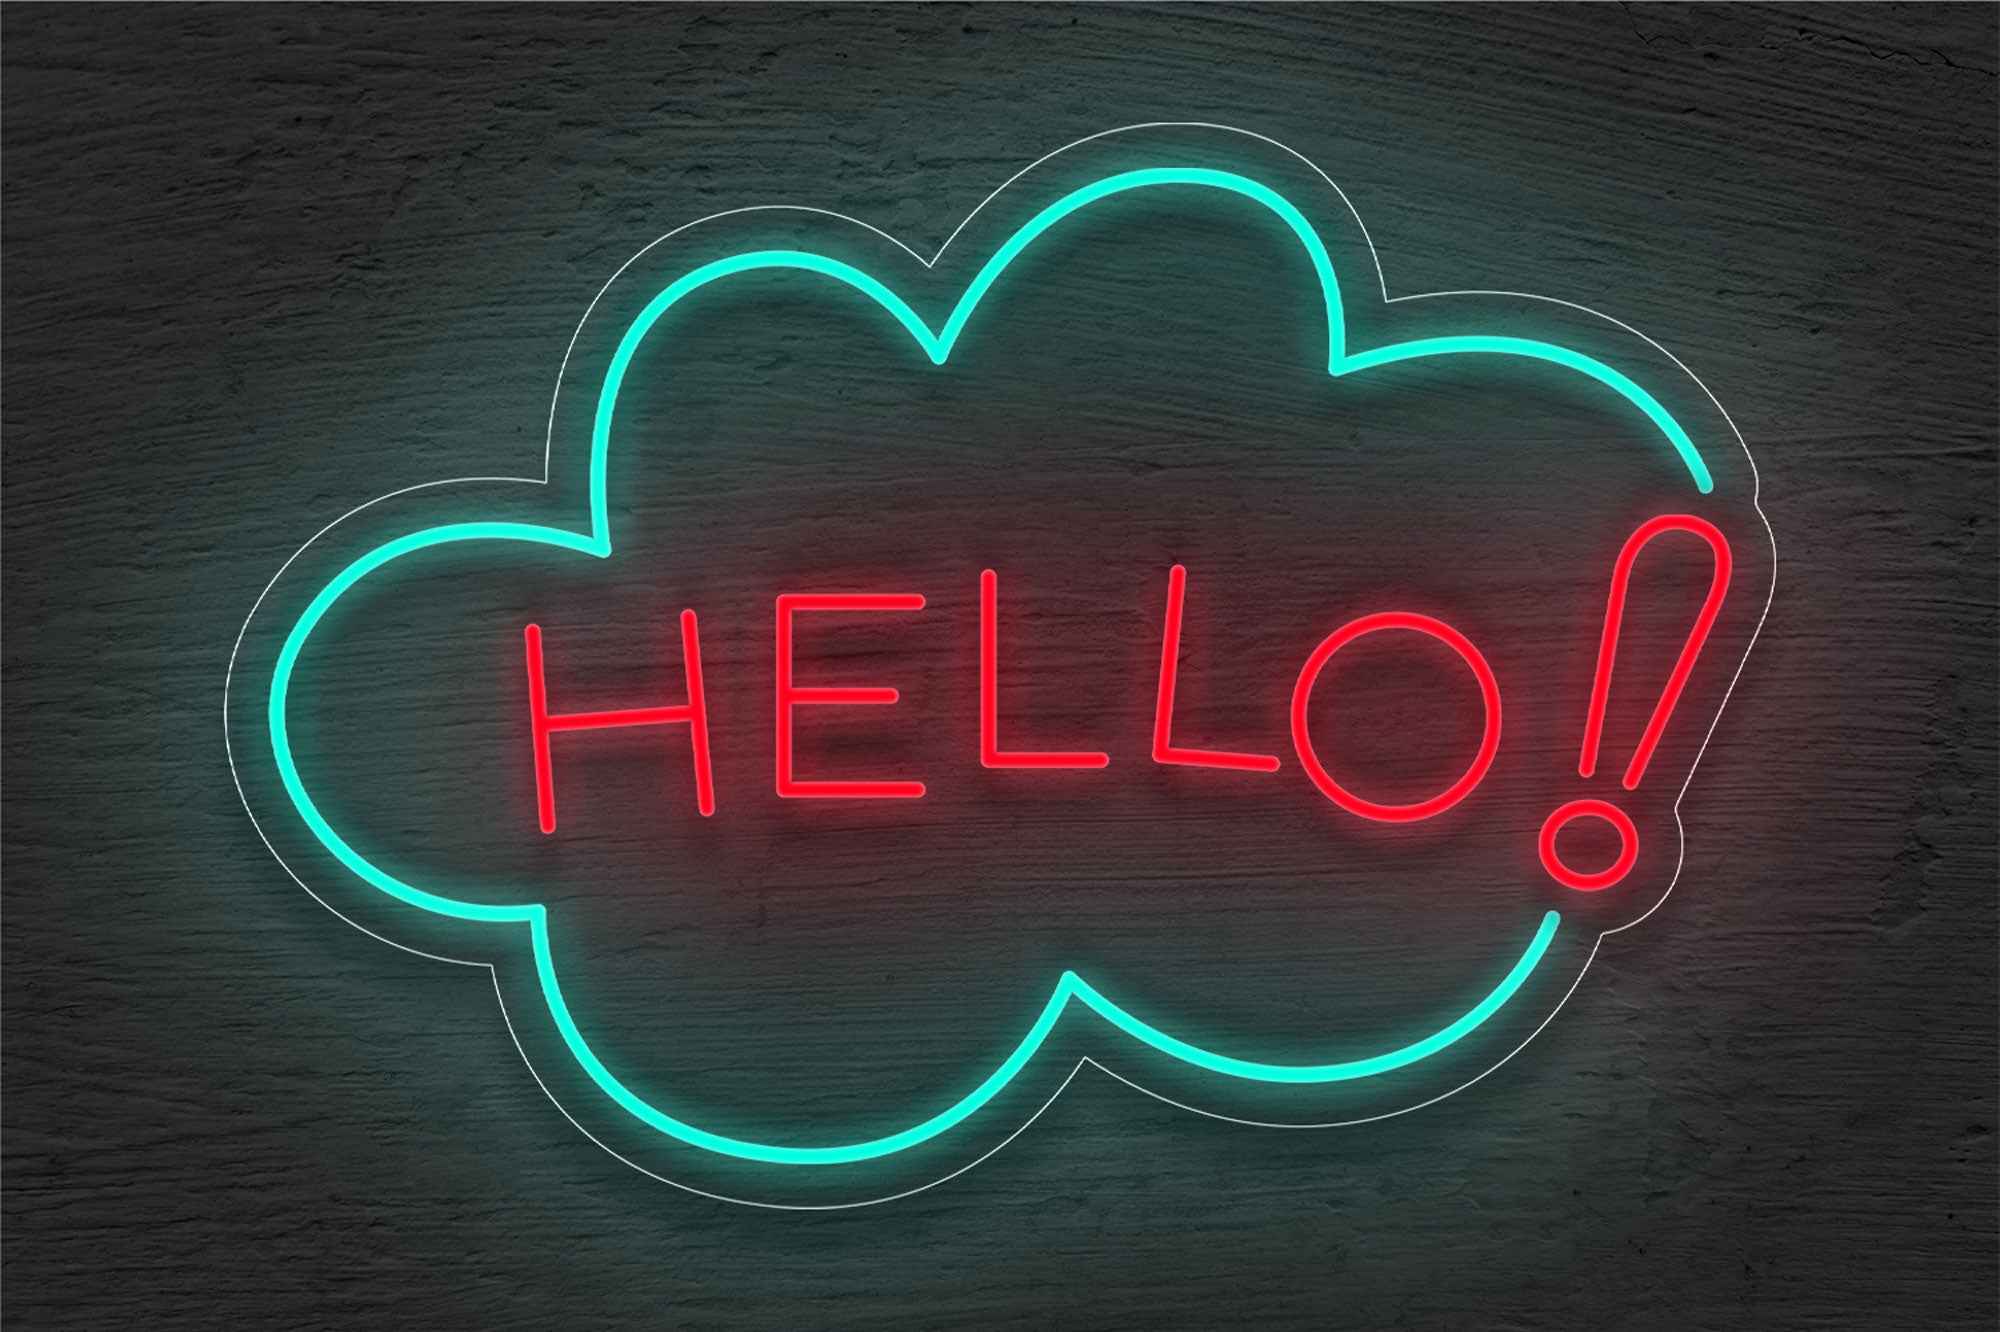 "Hello!" with Cloud Border LED Neon Sign